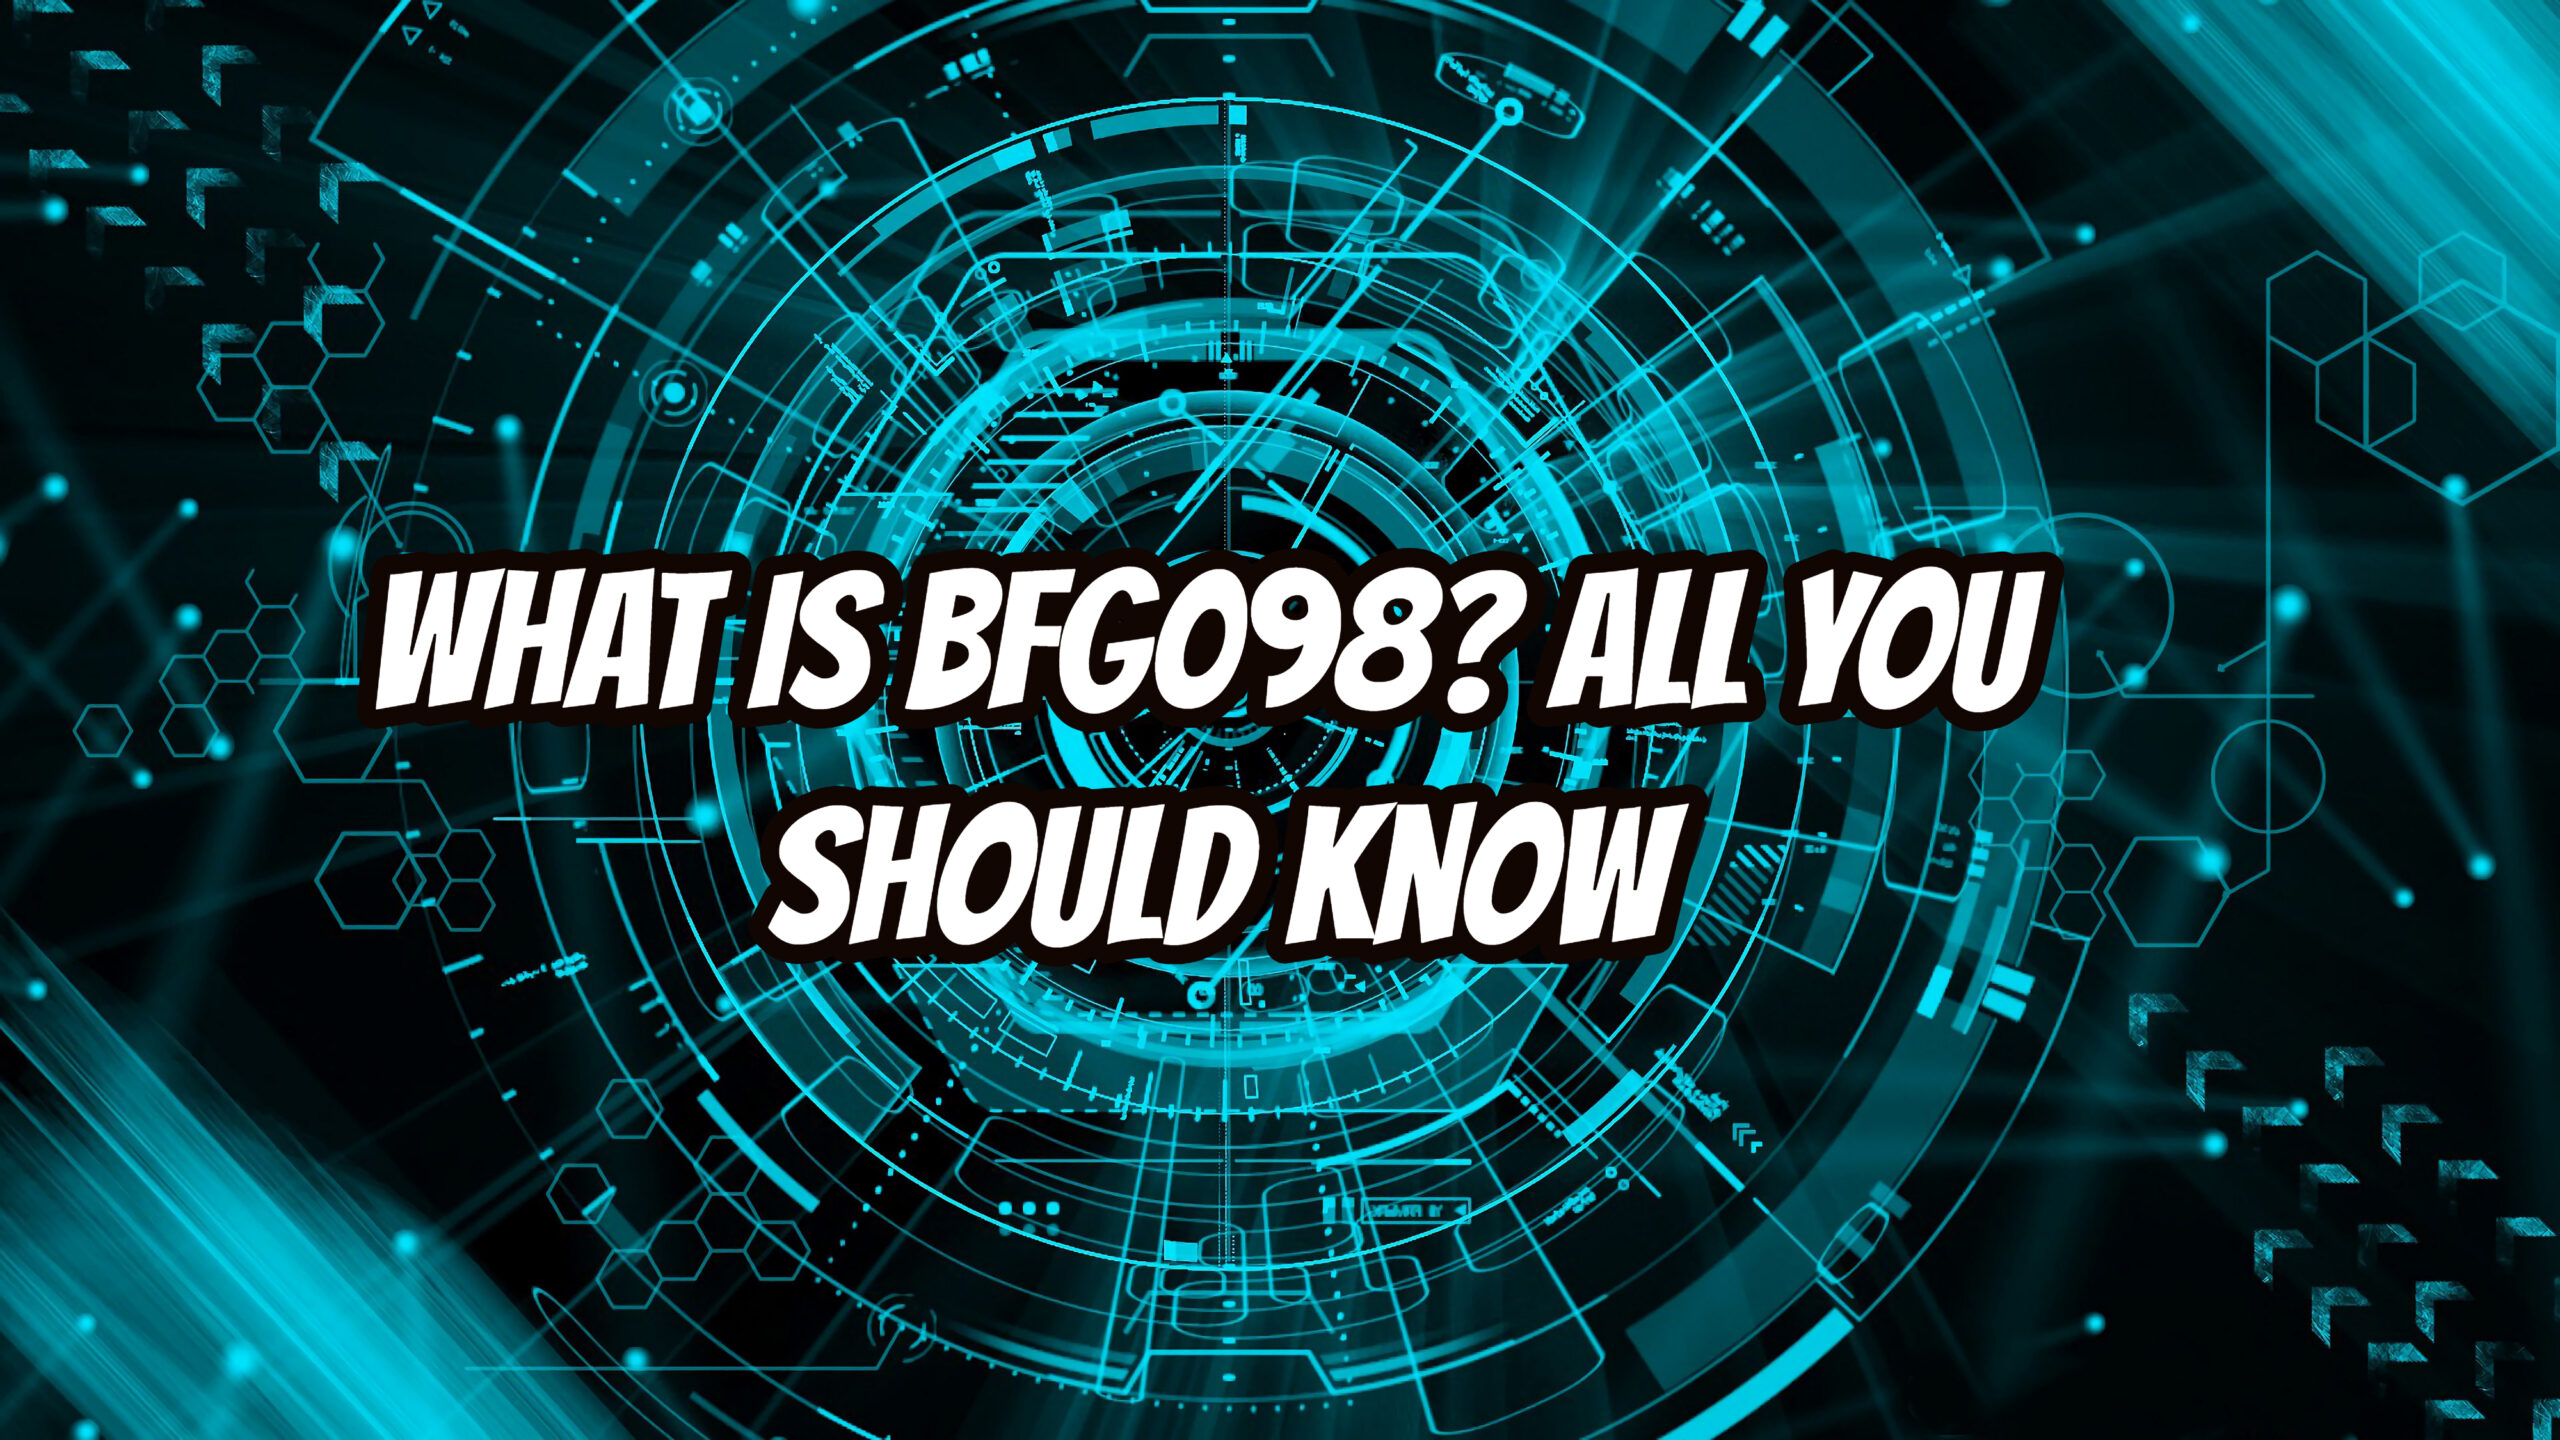 What is bfg098? ALL You Should Know